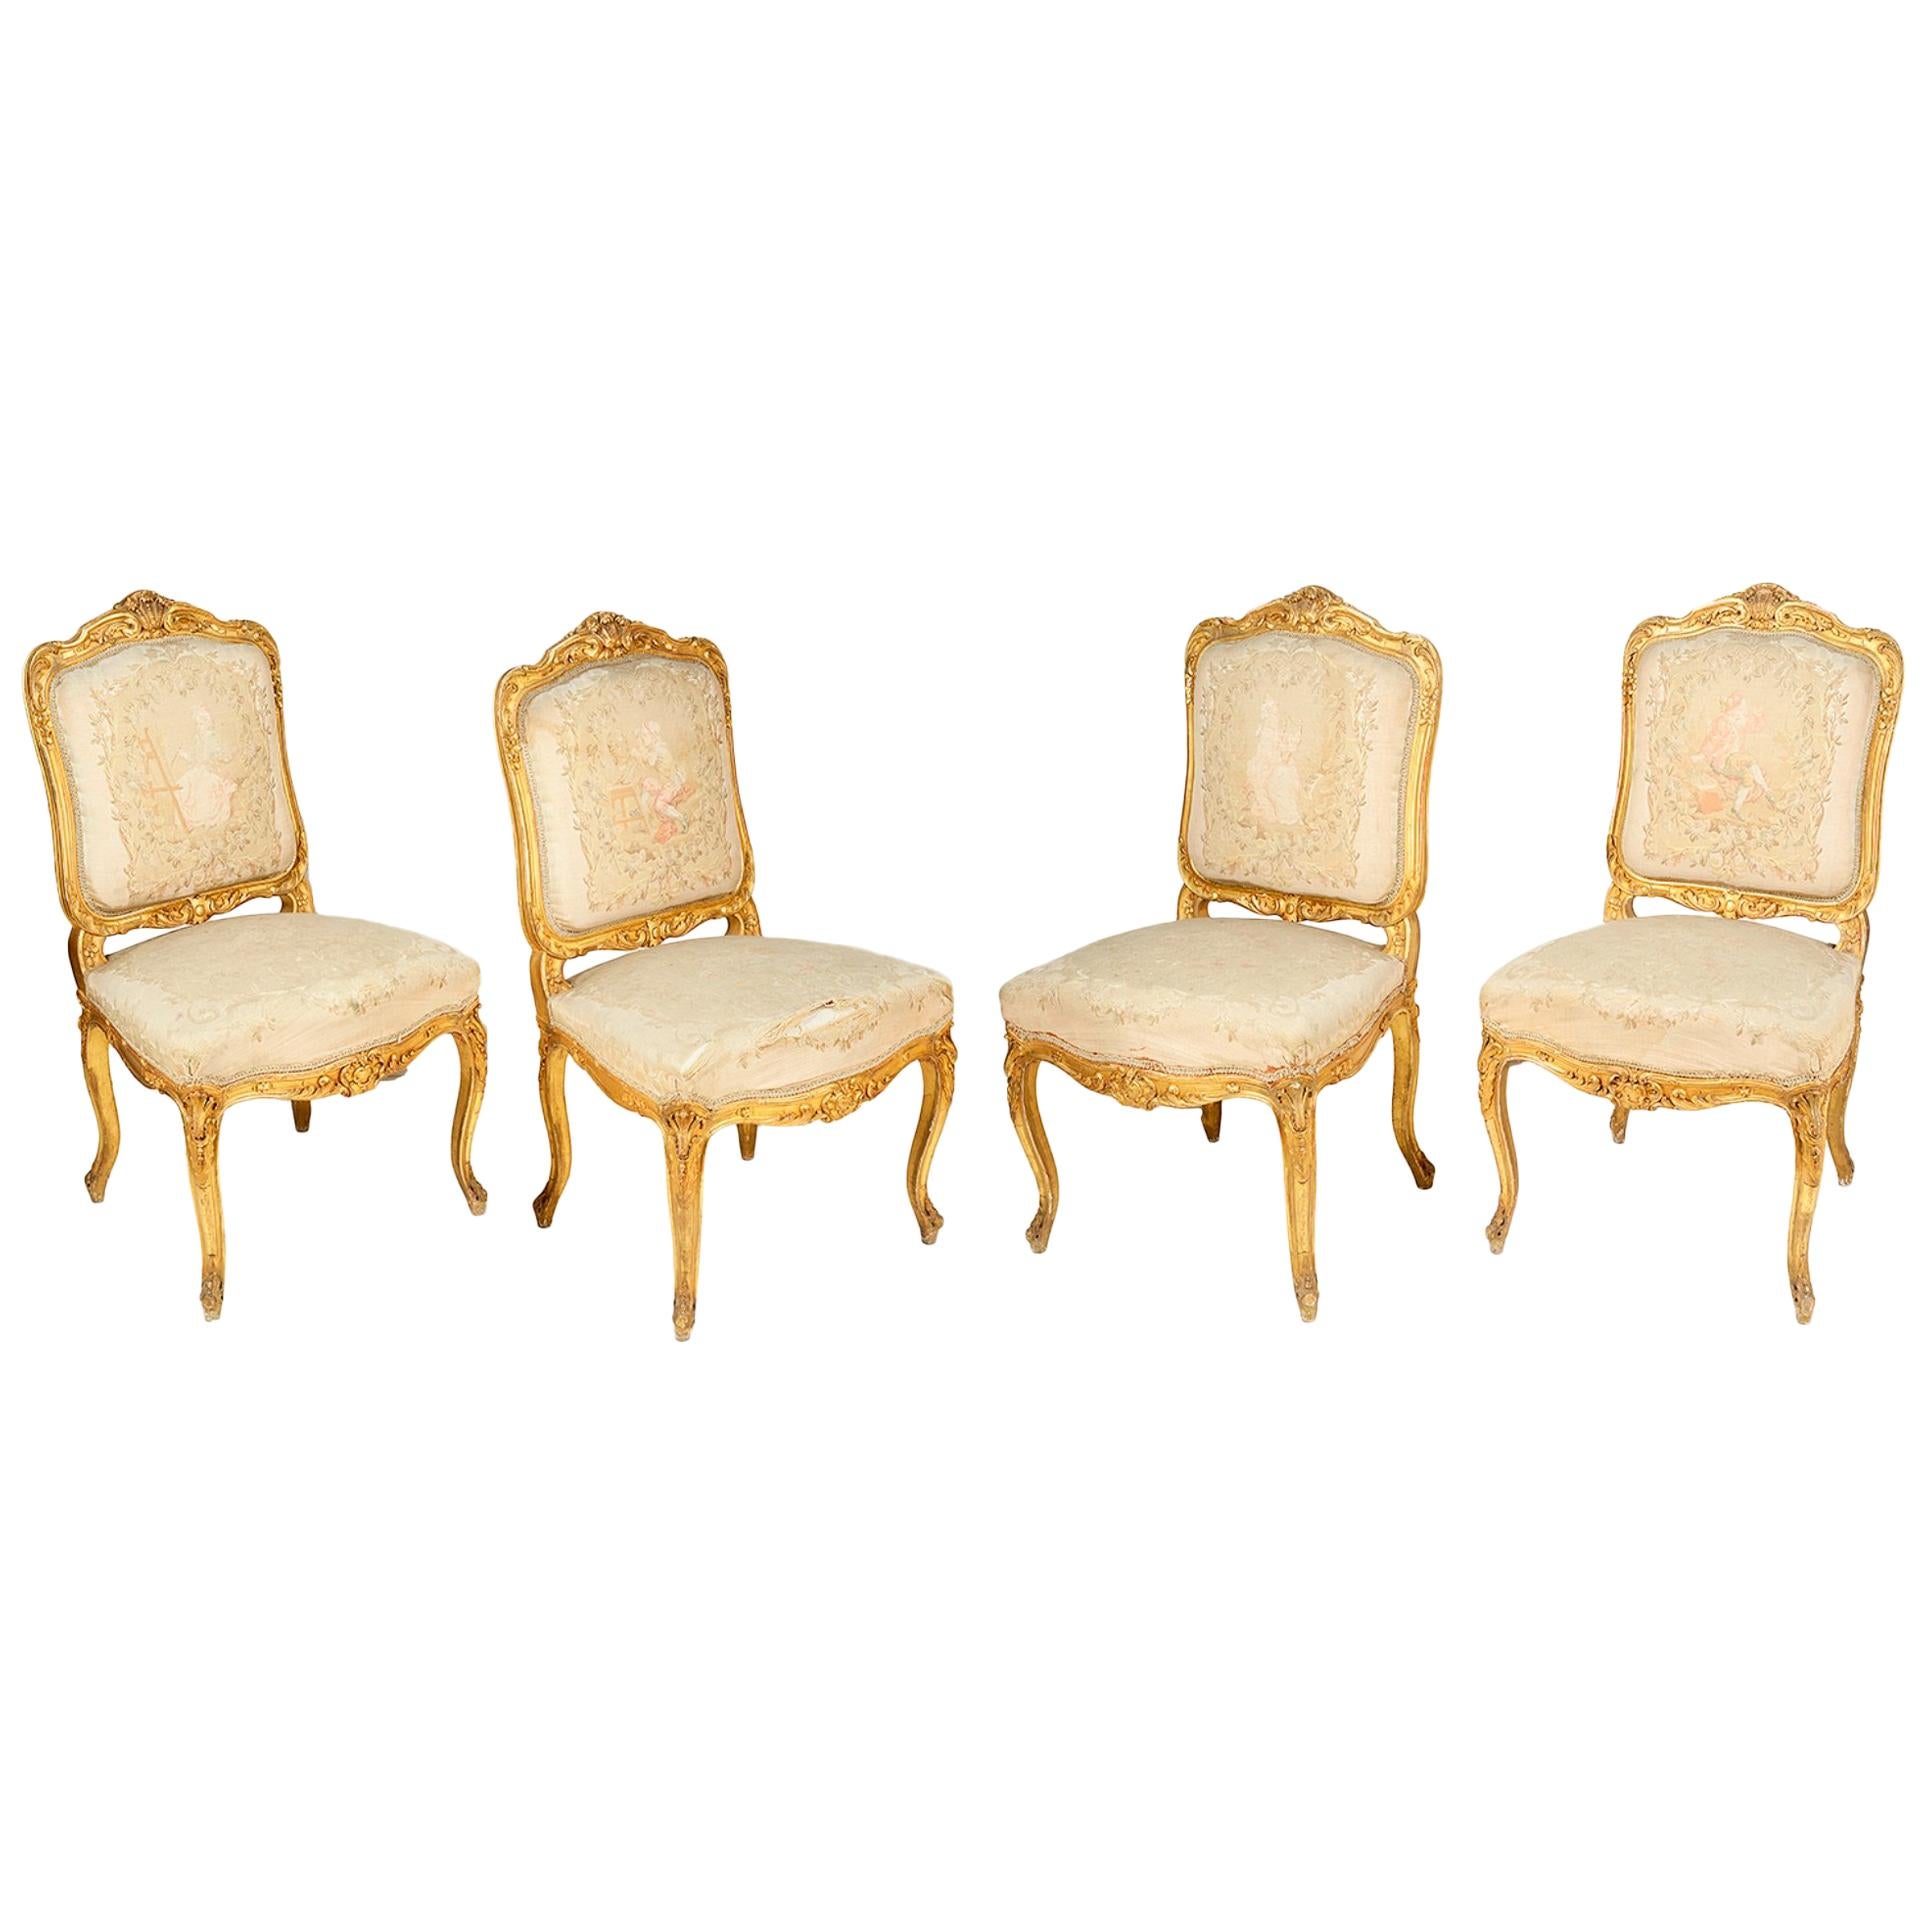 Set of Four 19th Century Gilded Salon Side Chairs